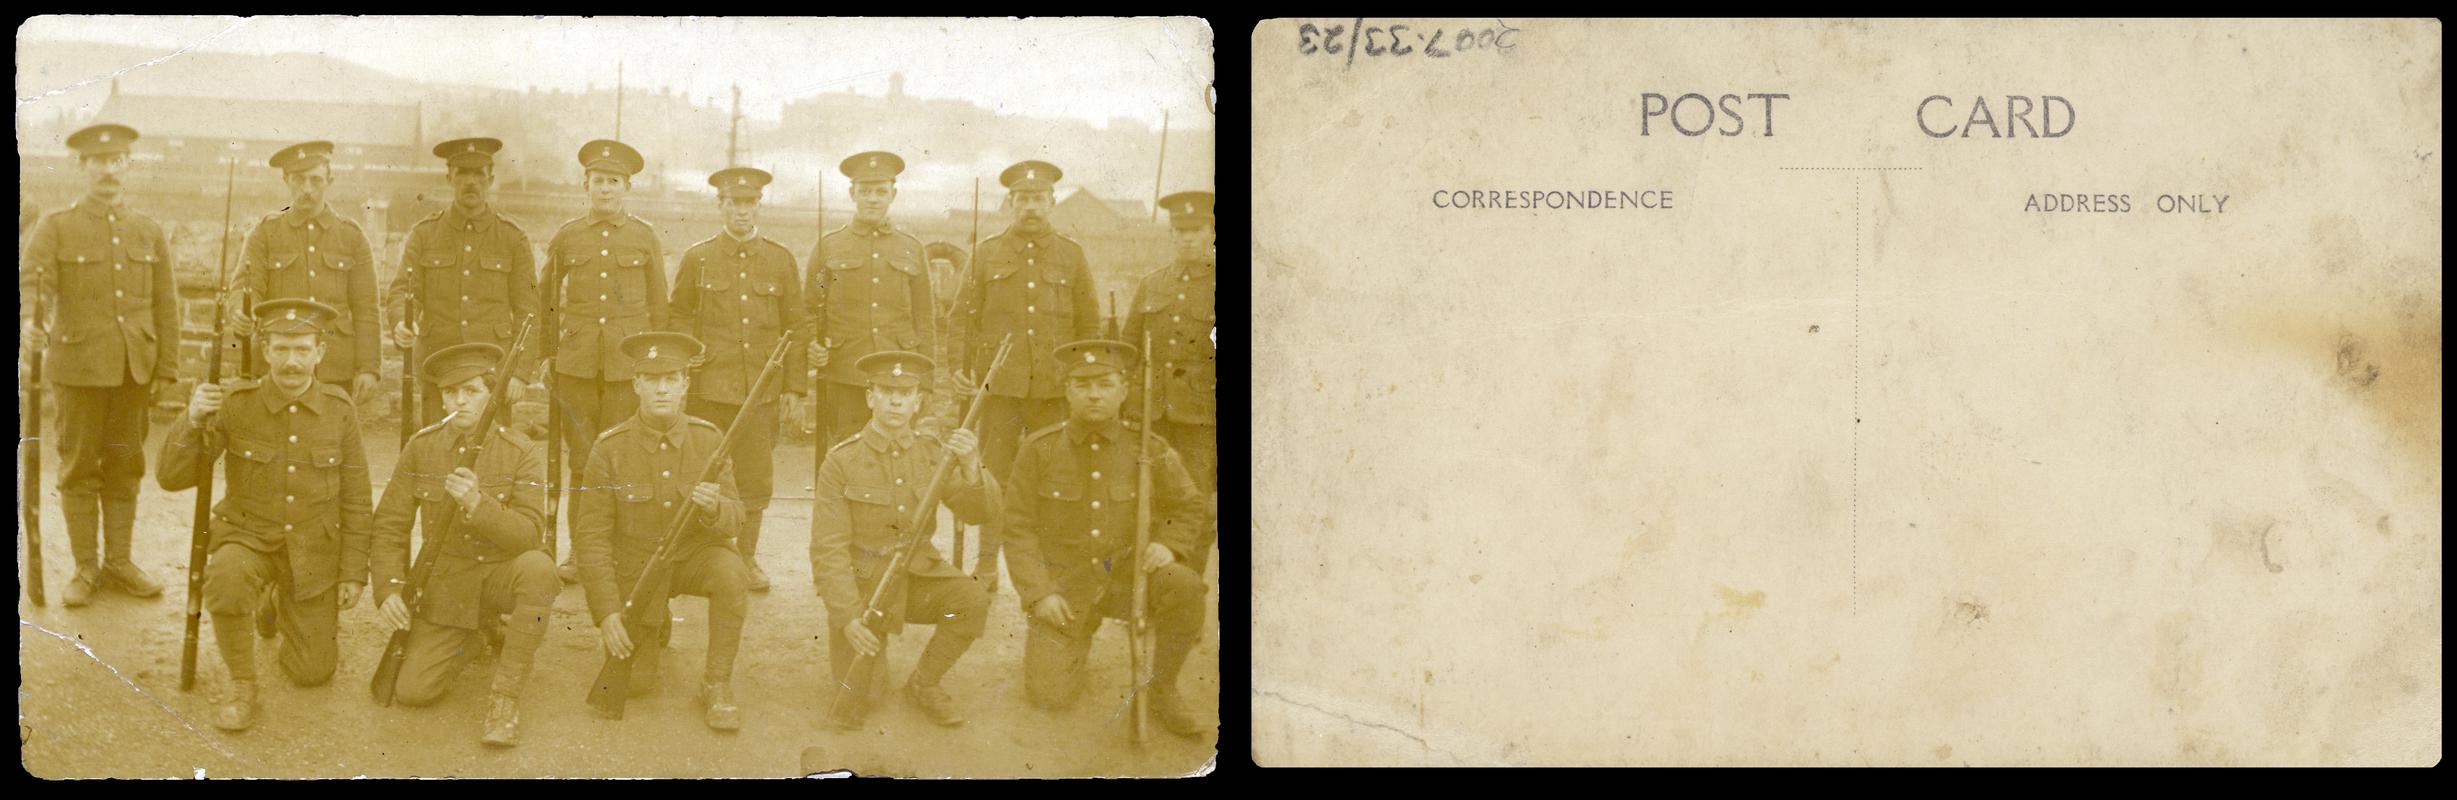 Group of 13 soldiers holding rifles (front & Back)